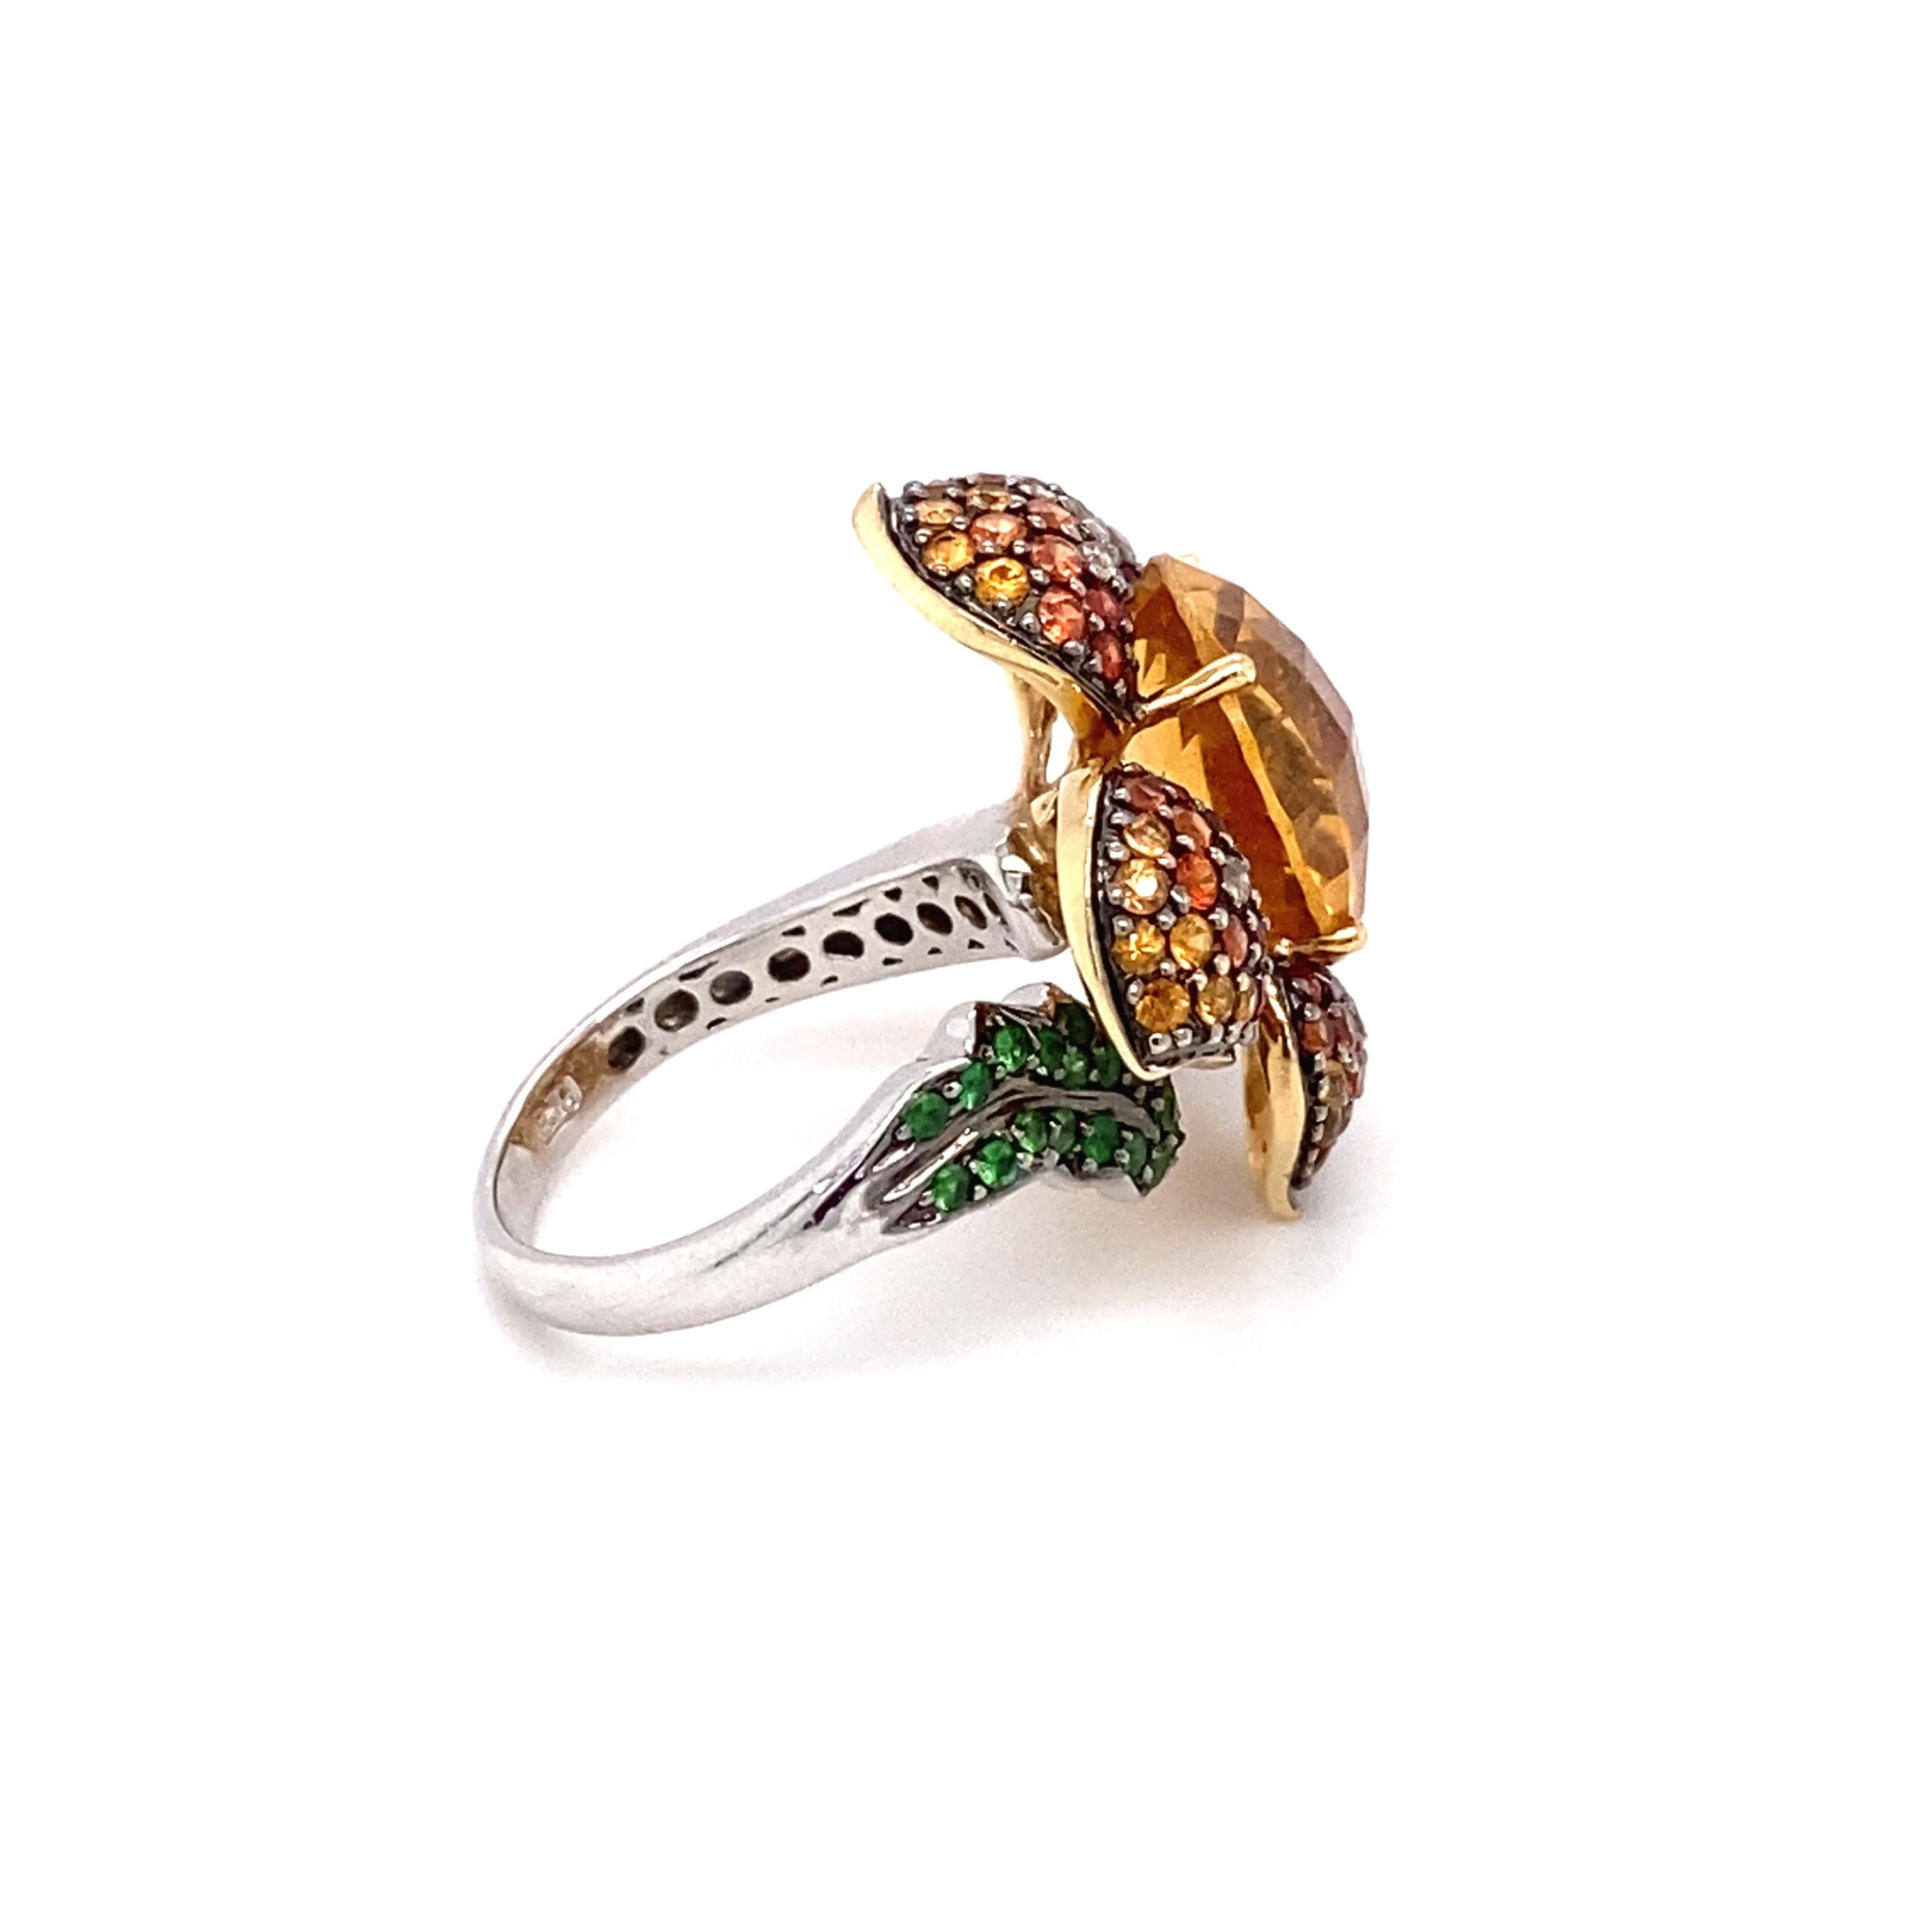 Metal Type: 14K white gold
Weight: 10.8 grams
Size: US 7.25

Features multicolored Garnet, Citrine and Accent Diamonds
Crafted in 14 Karat White Gold